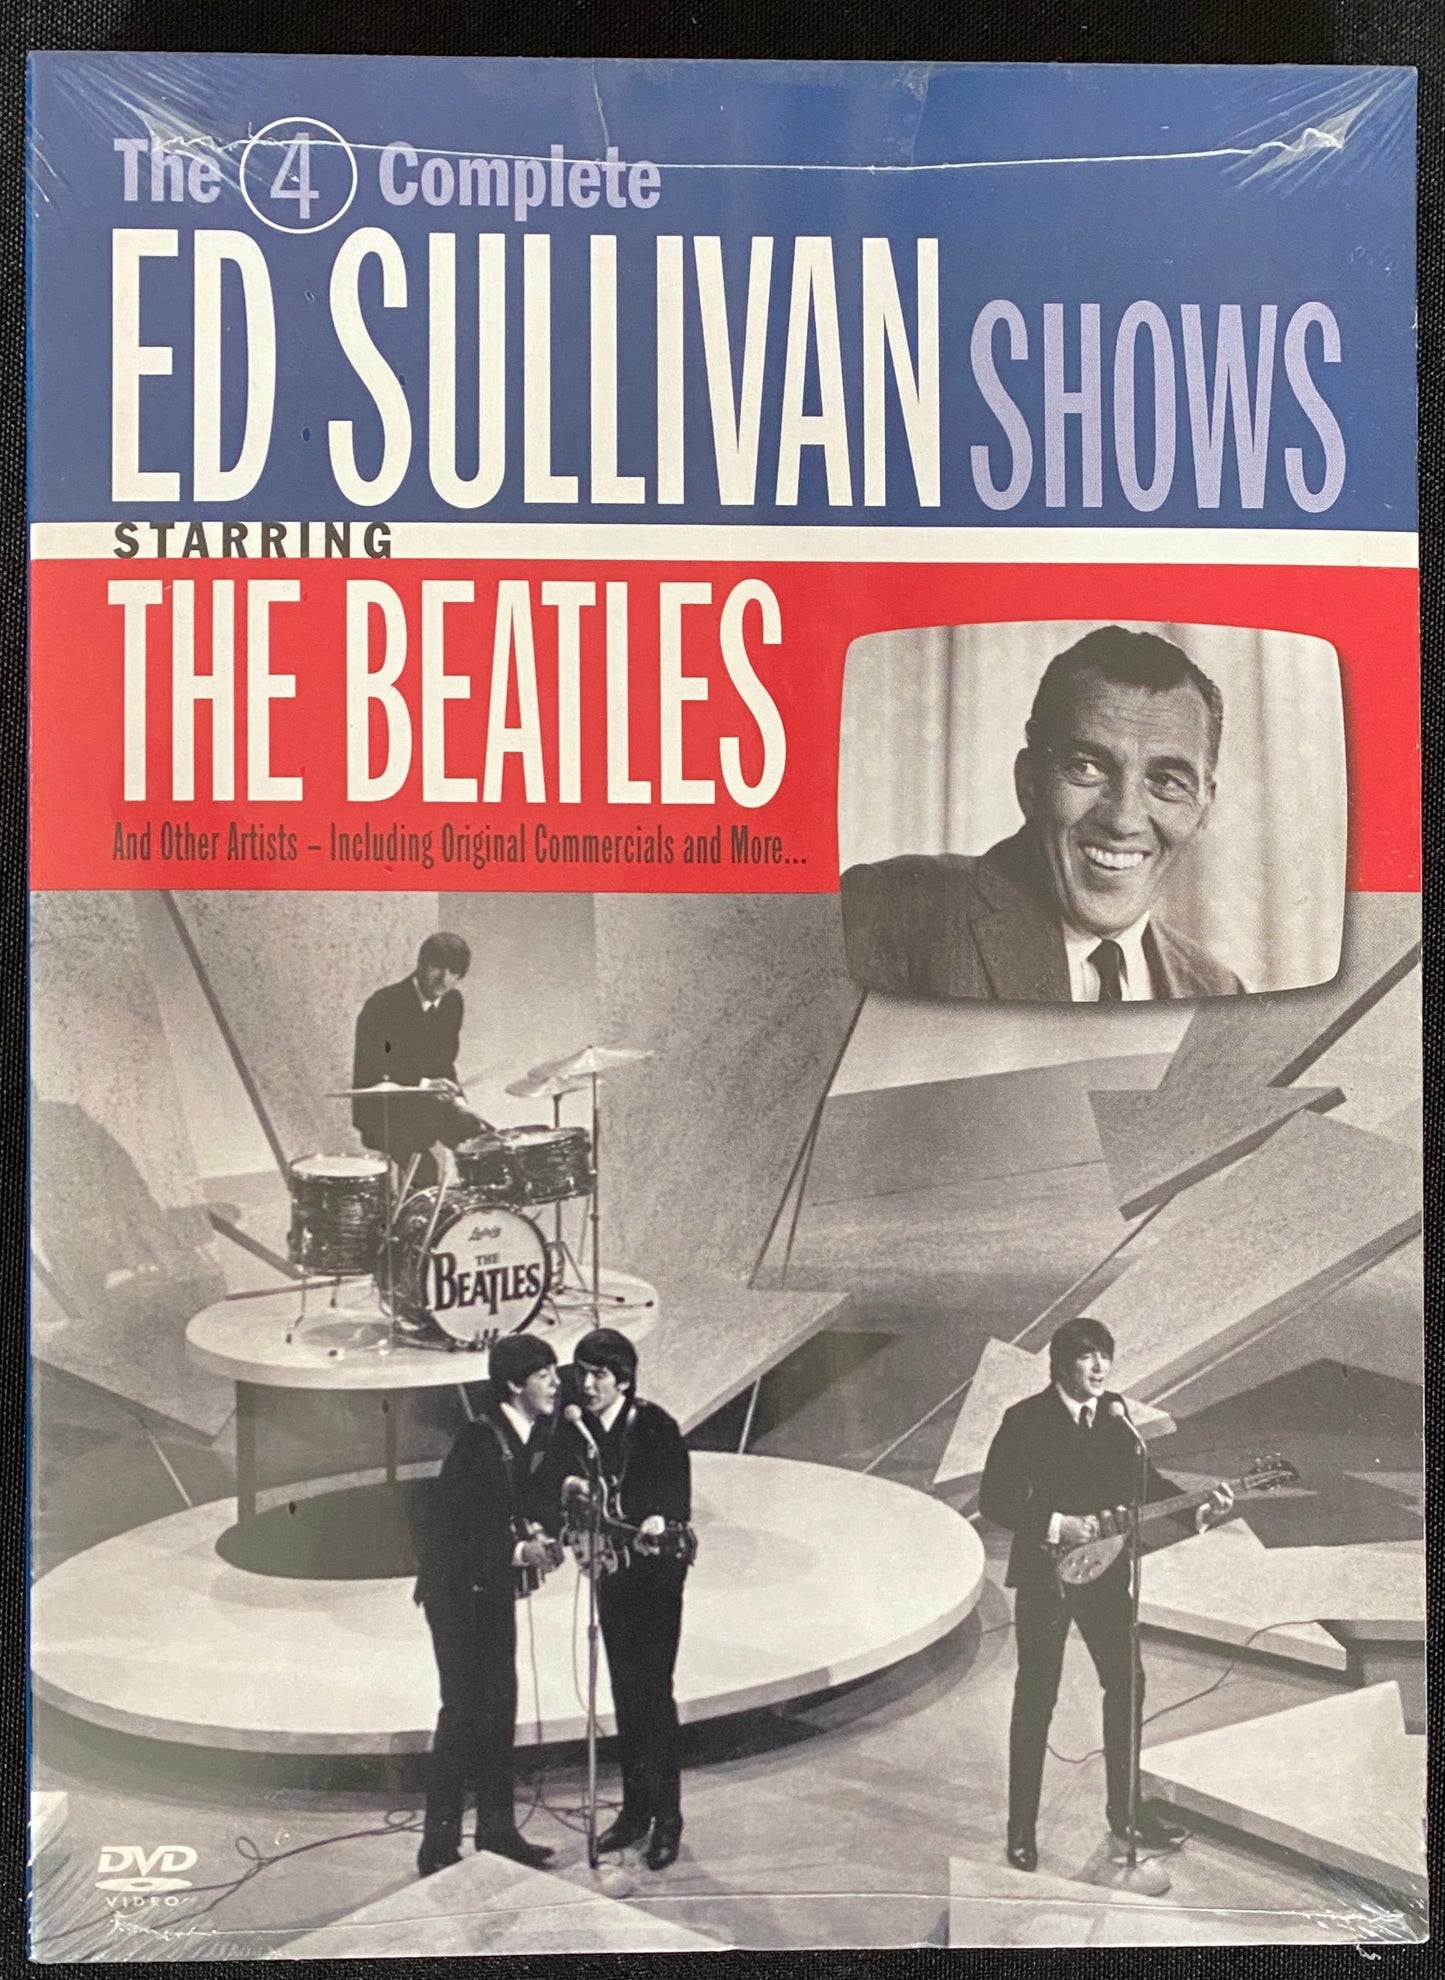 The Beatles - The 4 Complete Ed Sullivan Shows Starring The Beatles